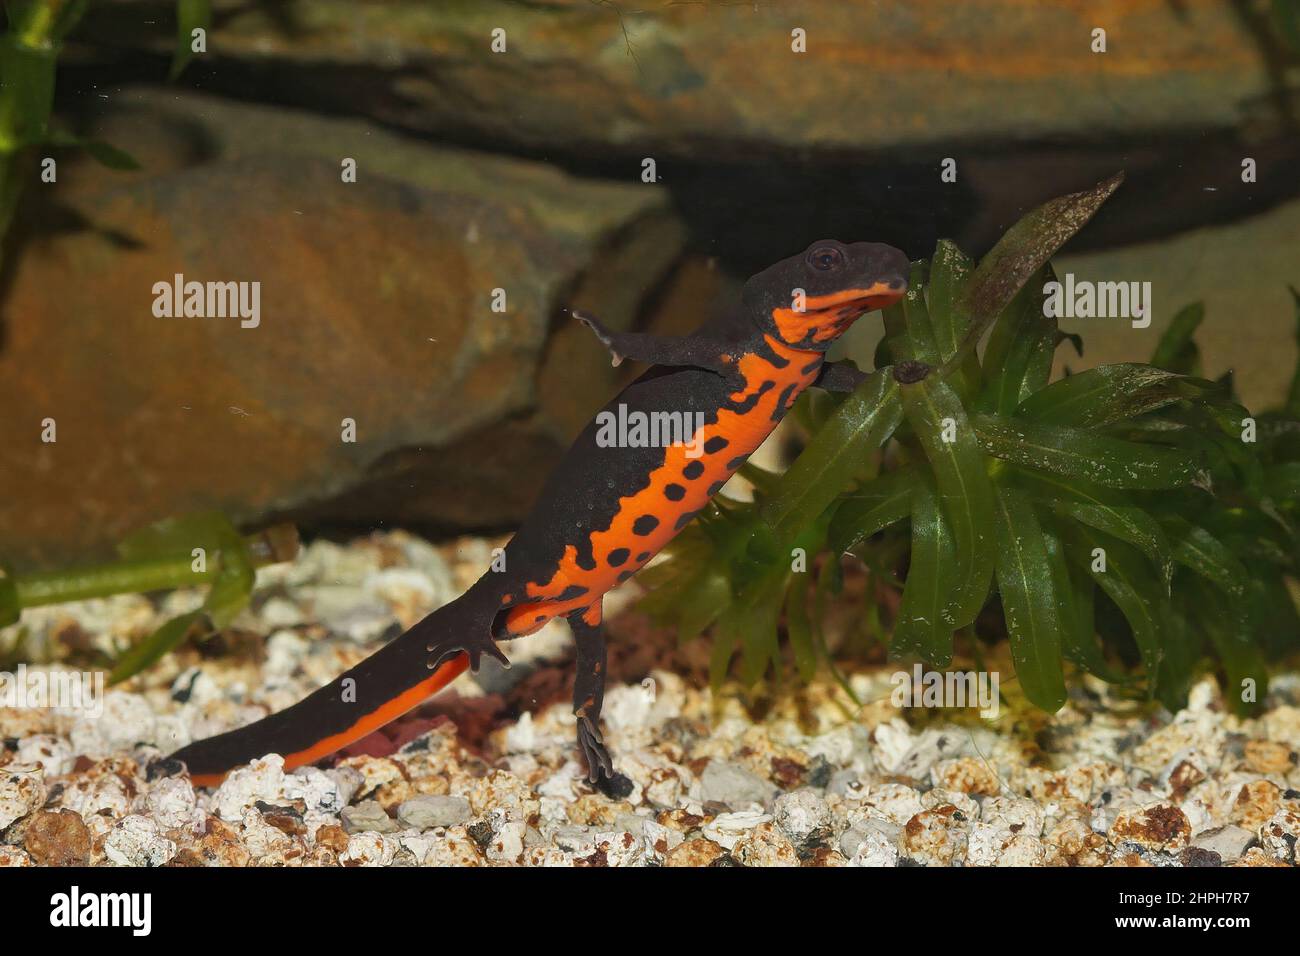 Closeup of an aquatic and gravid female Chinese firebellied newt, Cynops orientalis Stock Photo